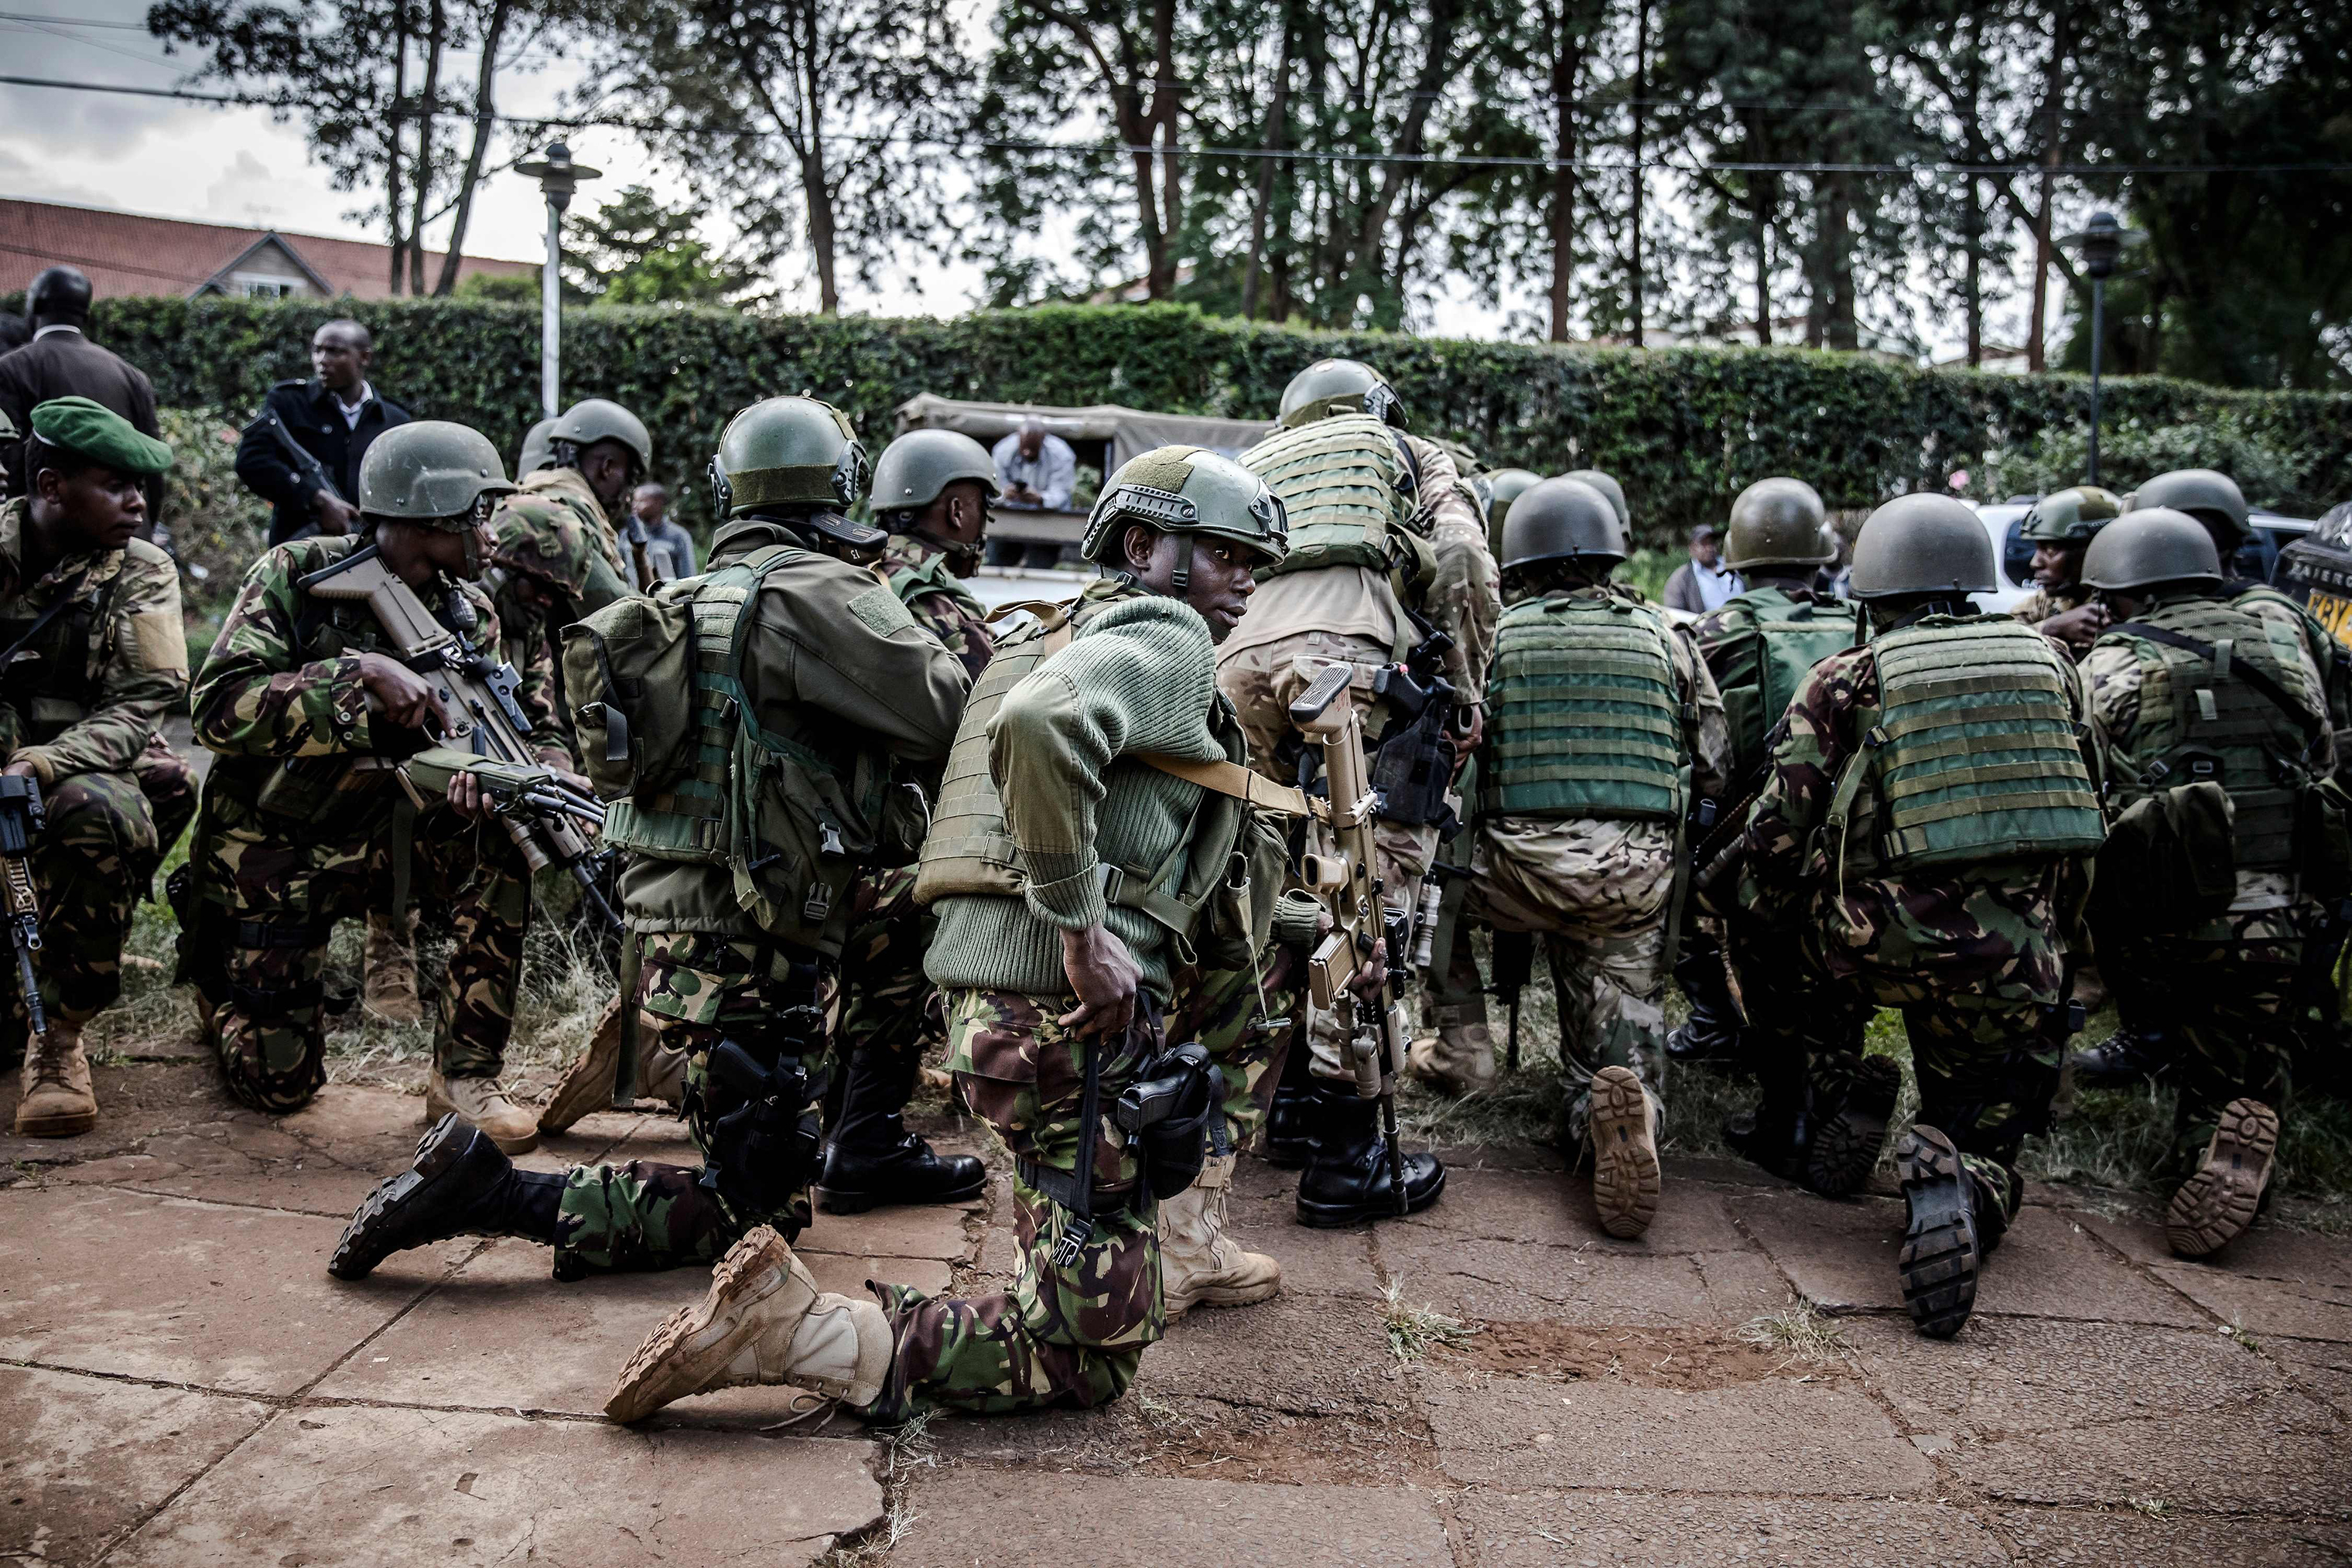 Kenyan special forces take position outside a hotel complex. (Luis Tato—AFP/Getty Images)